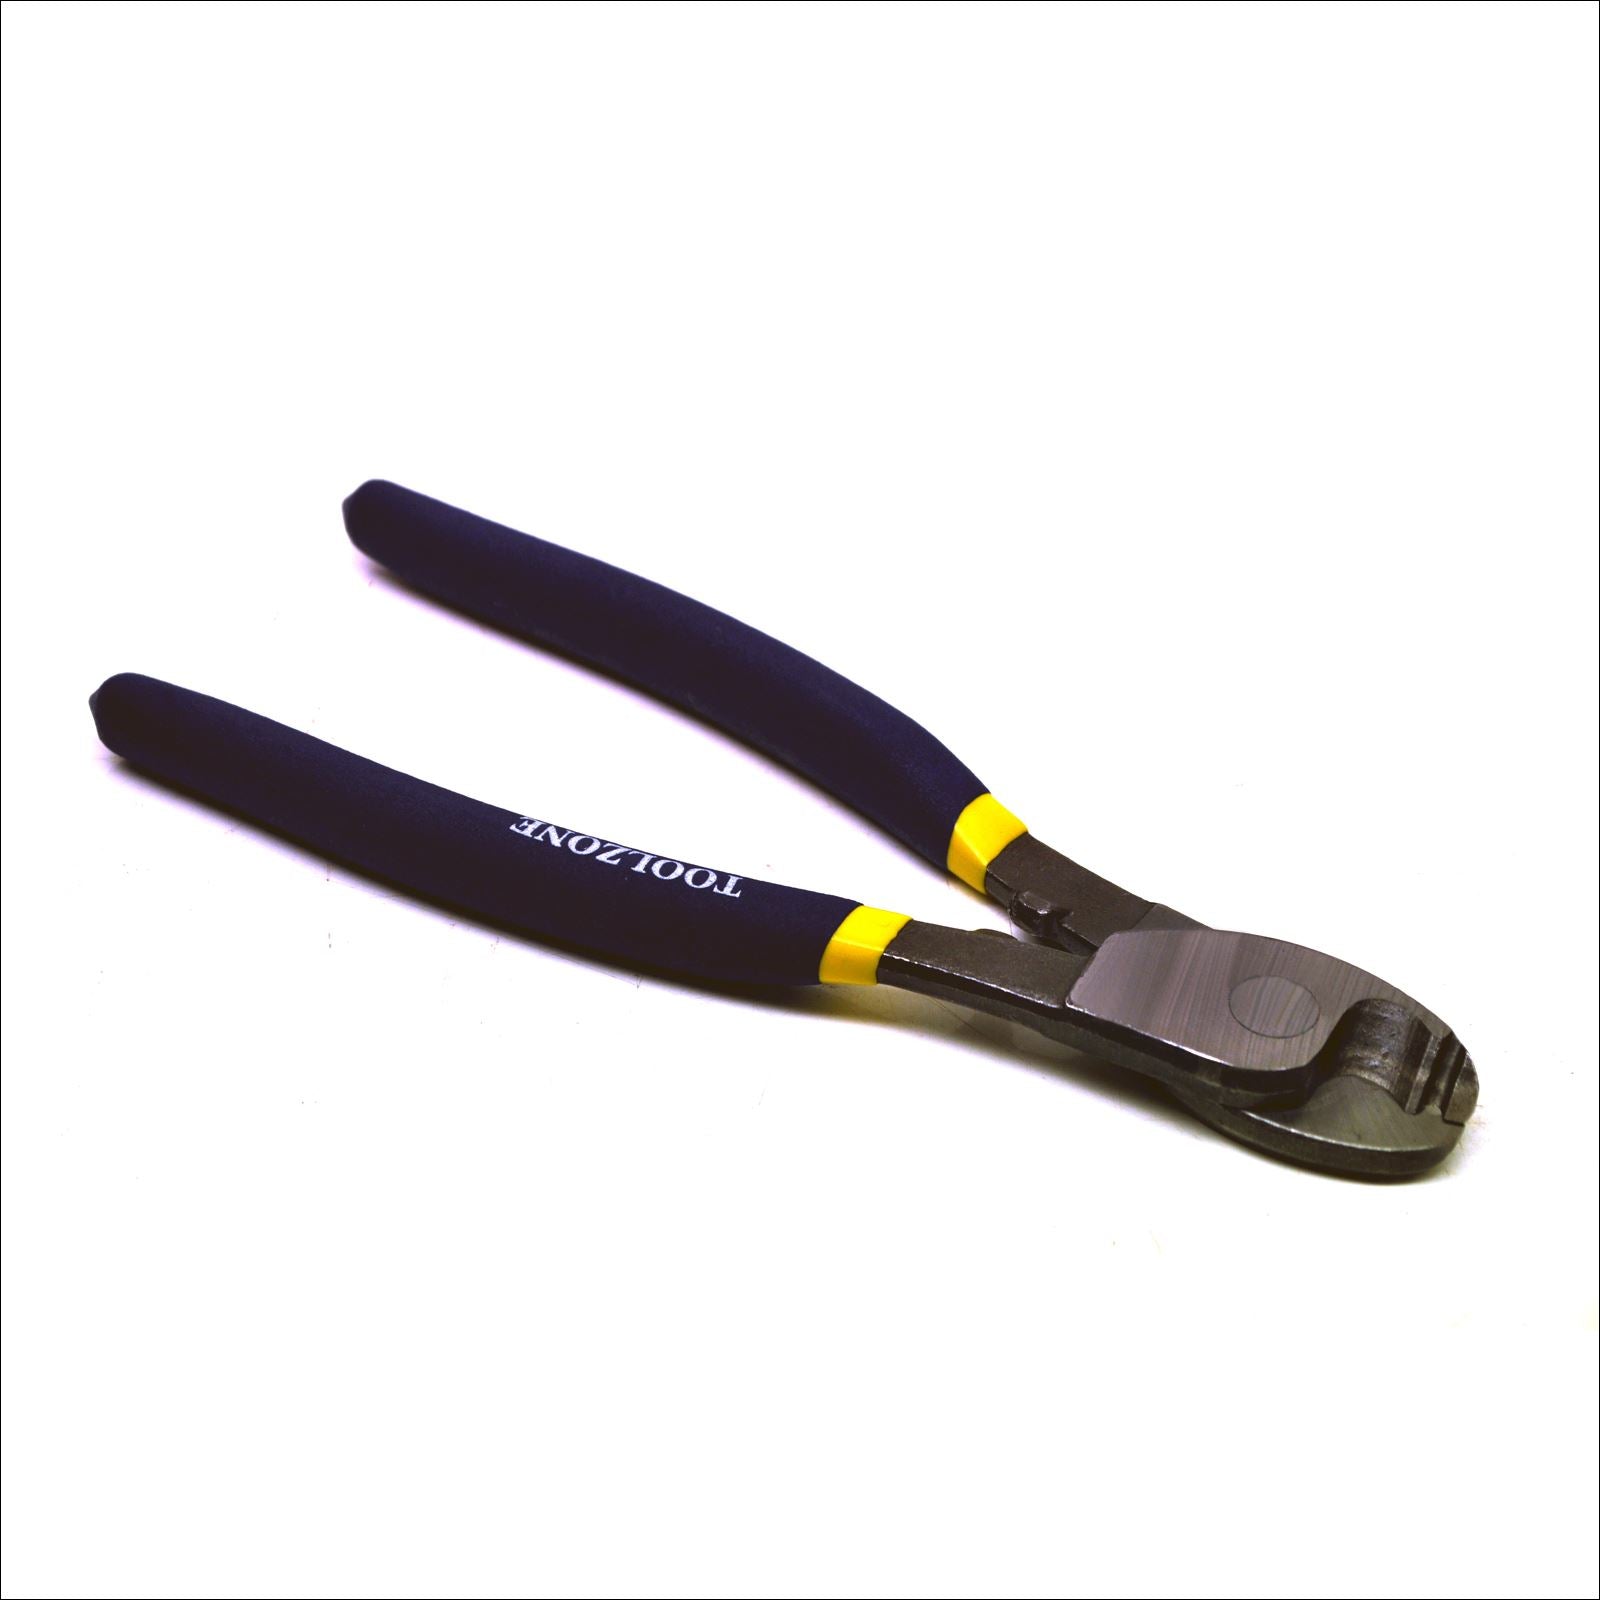 8" cable cutter / wire cutter cutting / snip / plier double dipped handles TE616